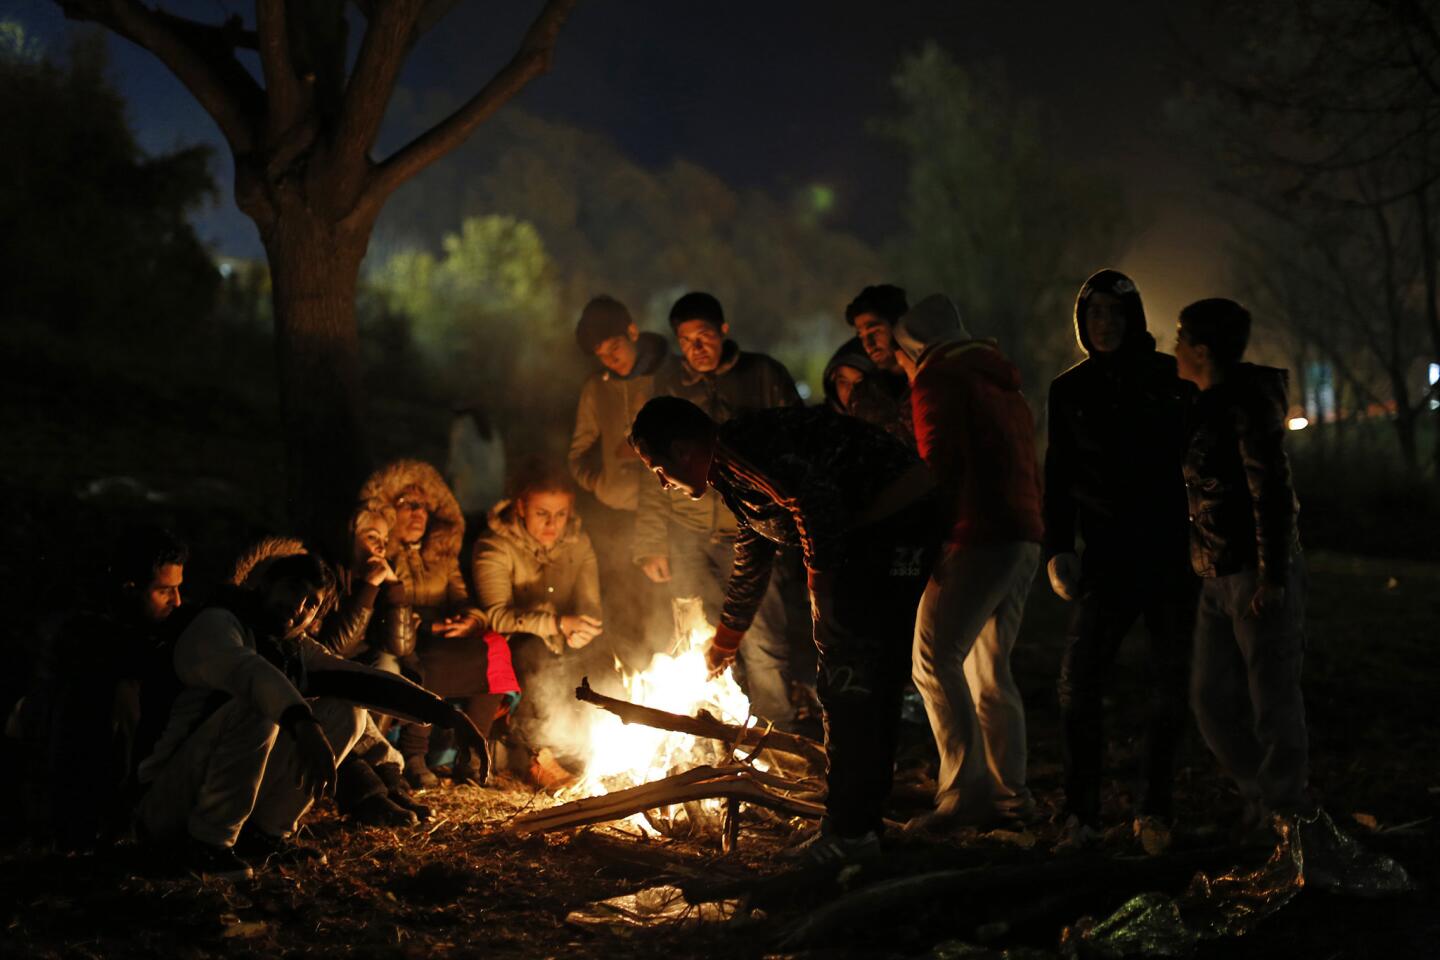 Photographer's journal: A look at Europe's migrant crisis